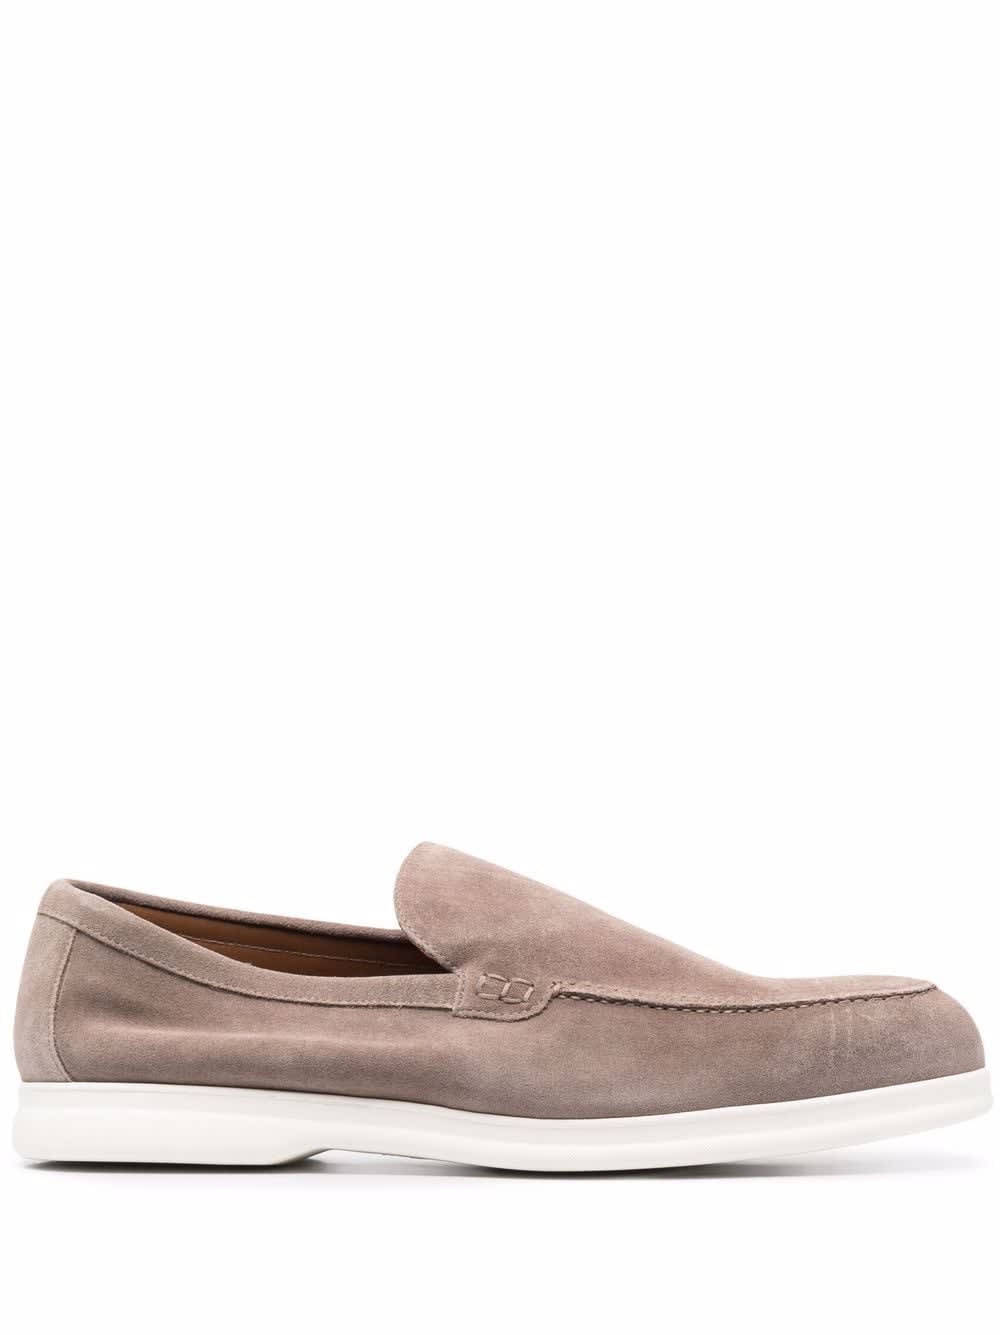 Doucals Man Taupe And White Sports Loafer In Suede